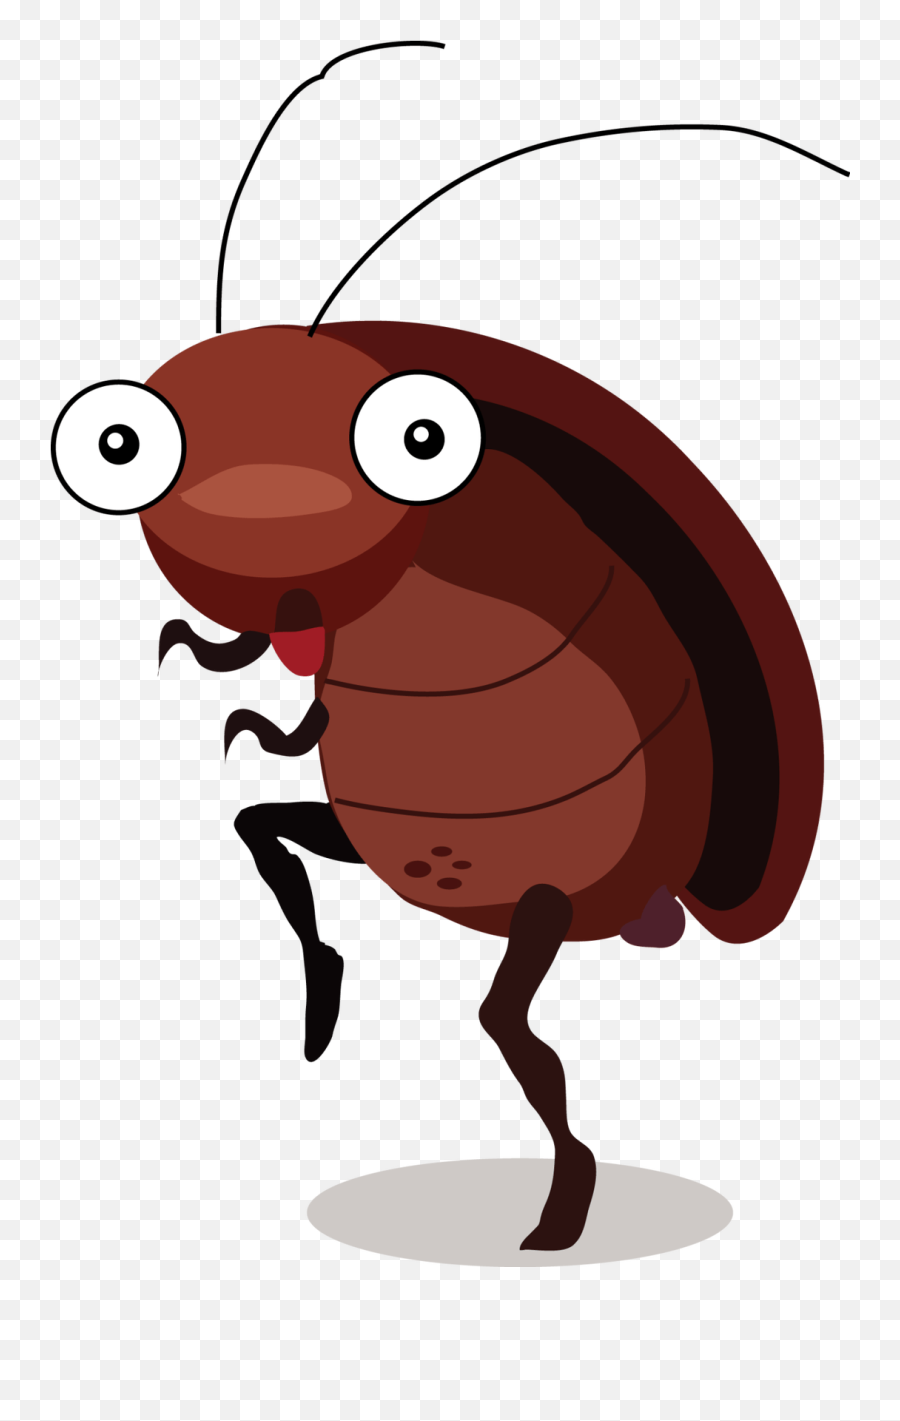 Insects Clipart Garden Creature - Cockroach Illustration Emoji,Insects Clipart